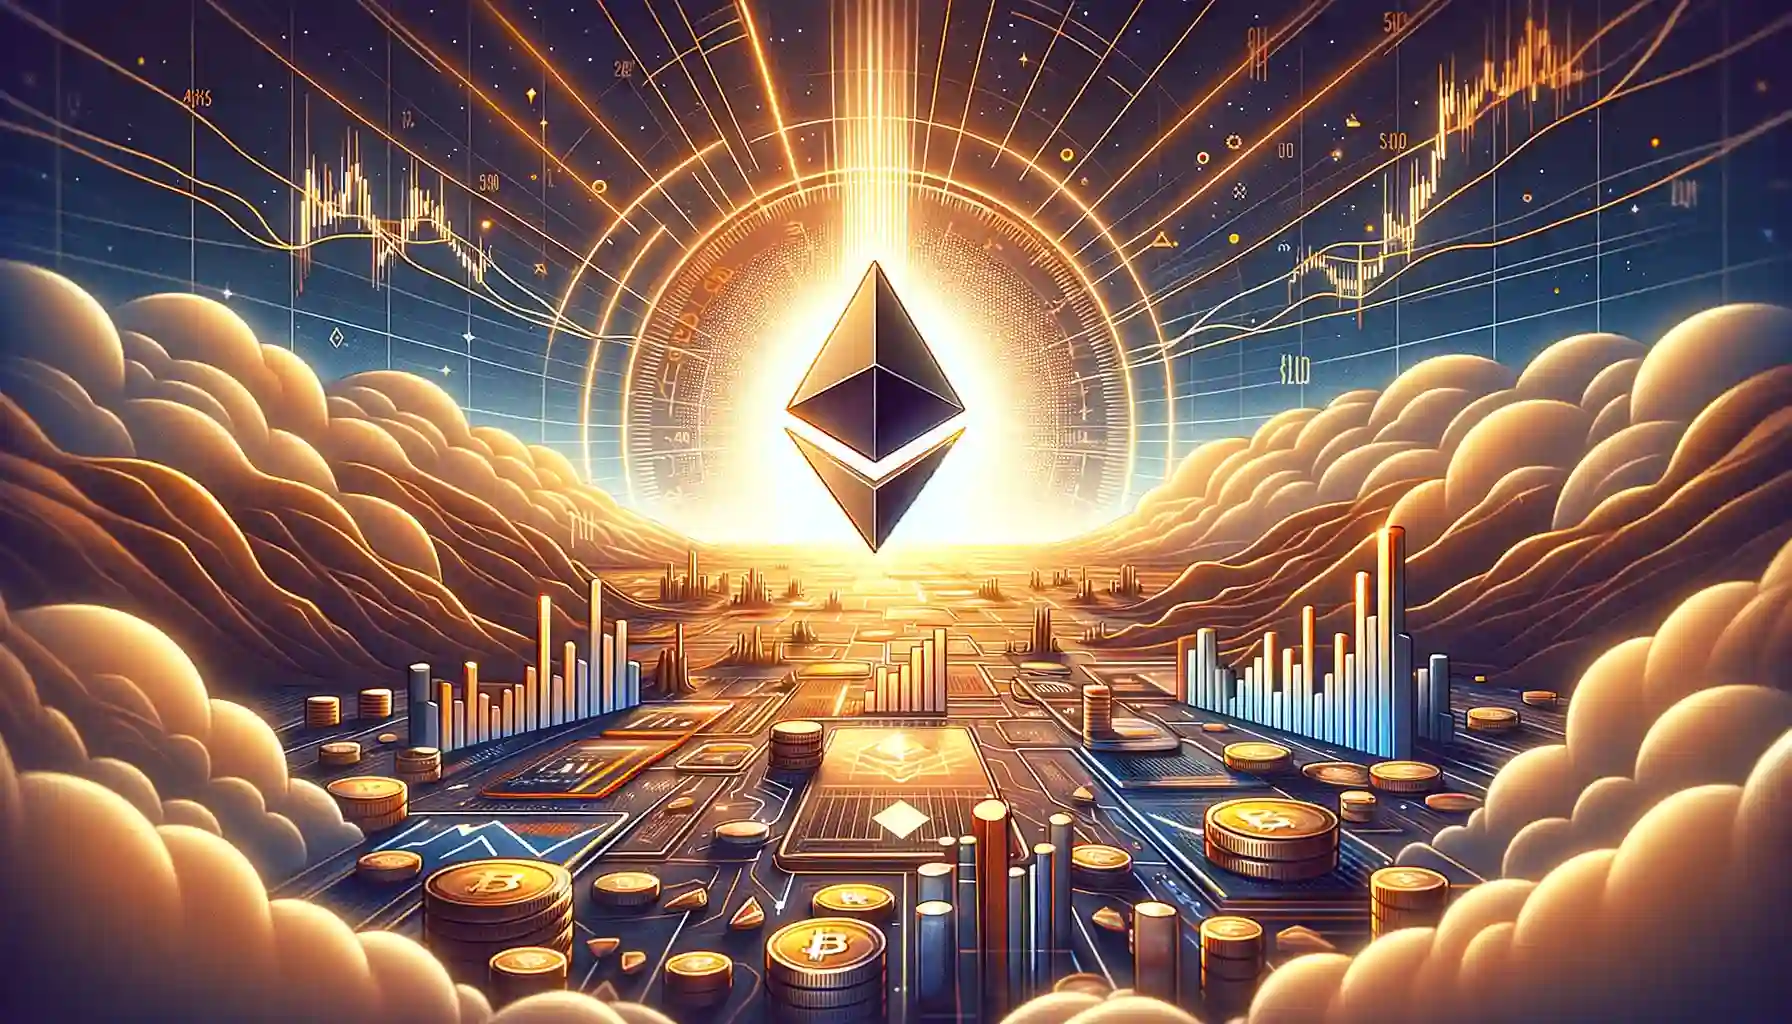 Ethereum crosses $4,000 - How long before its ATH falls?